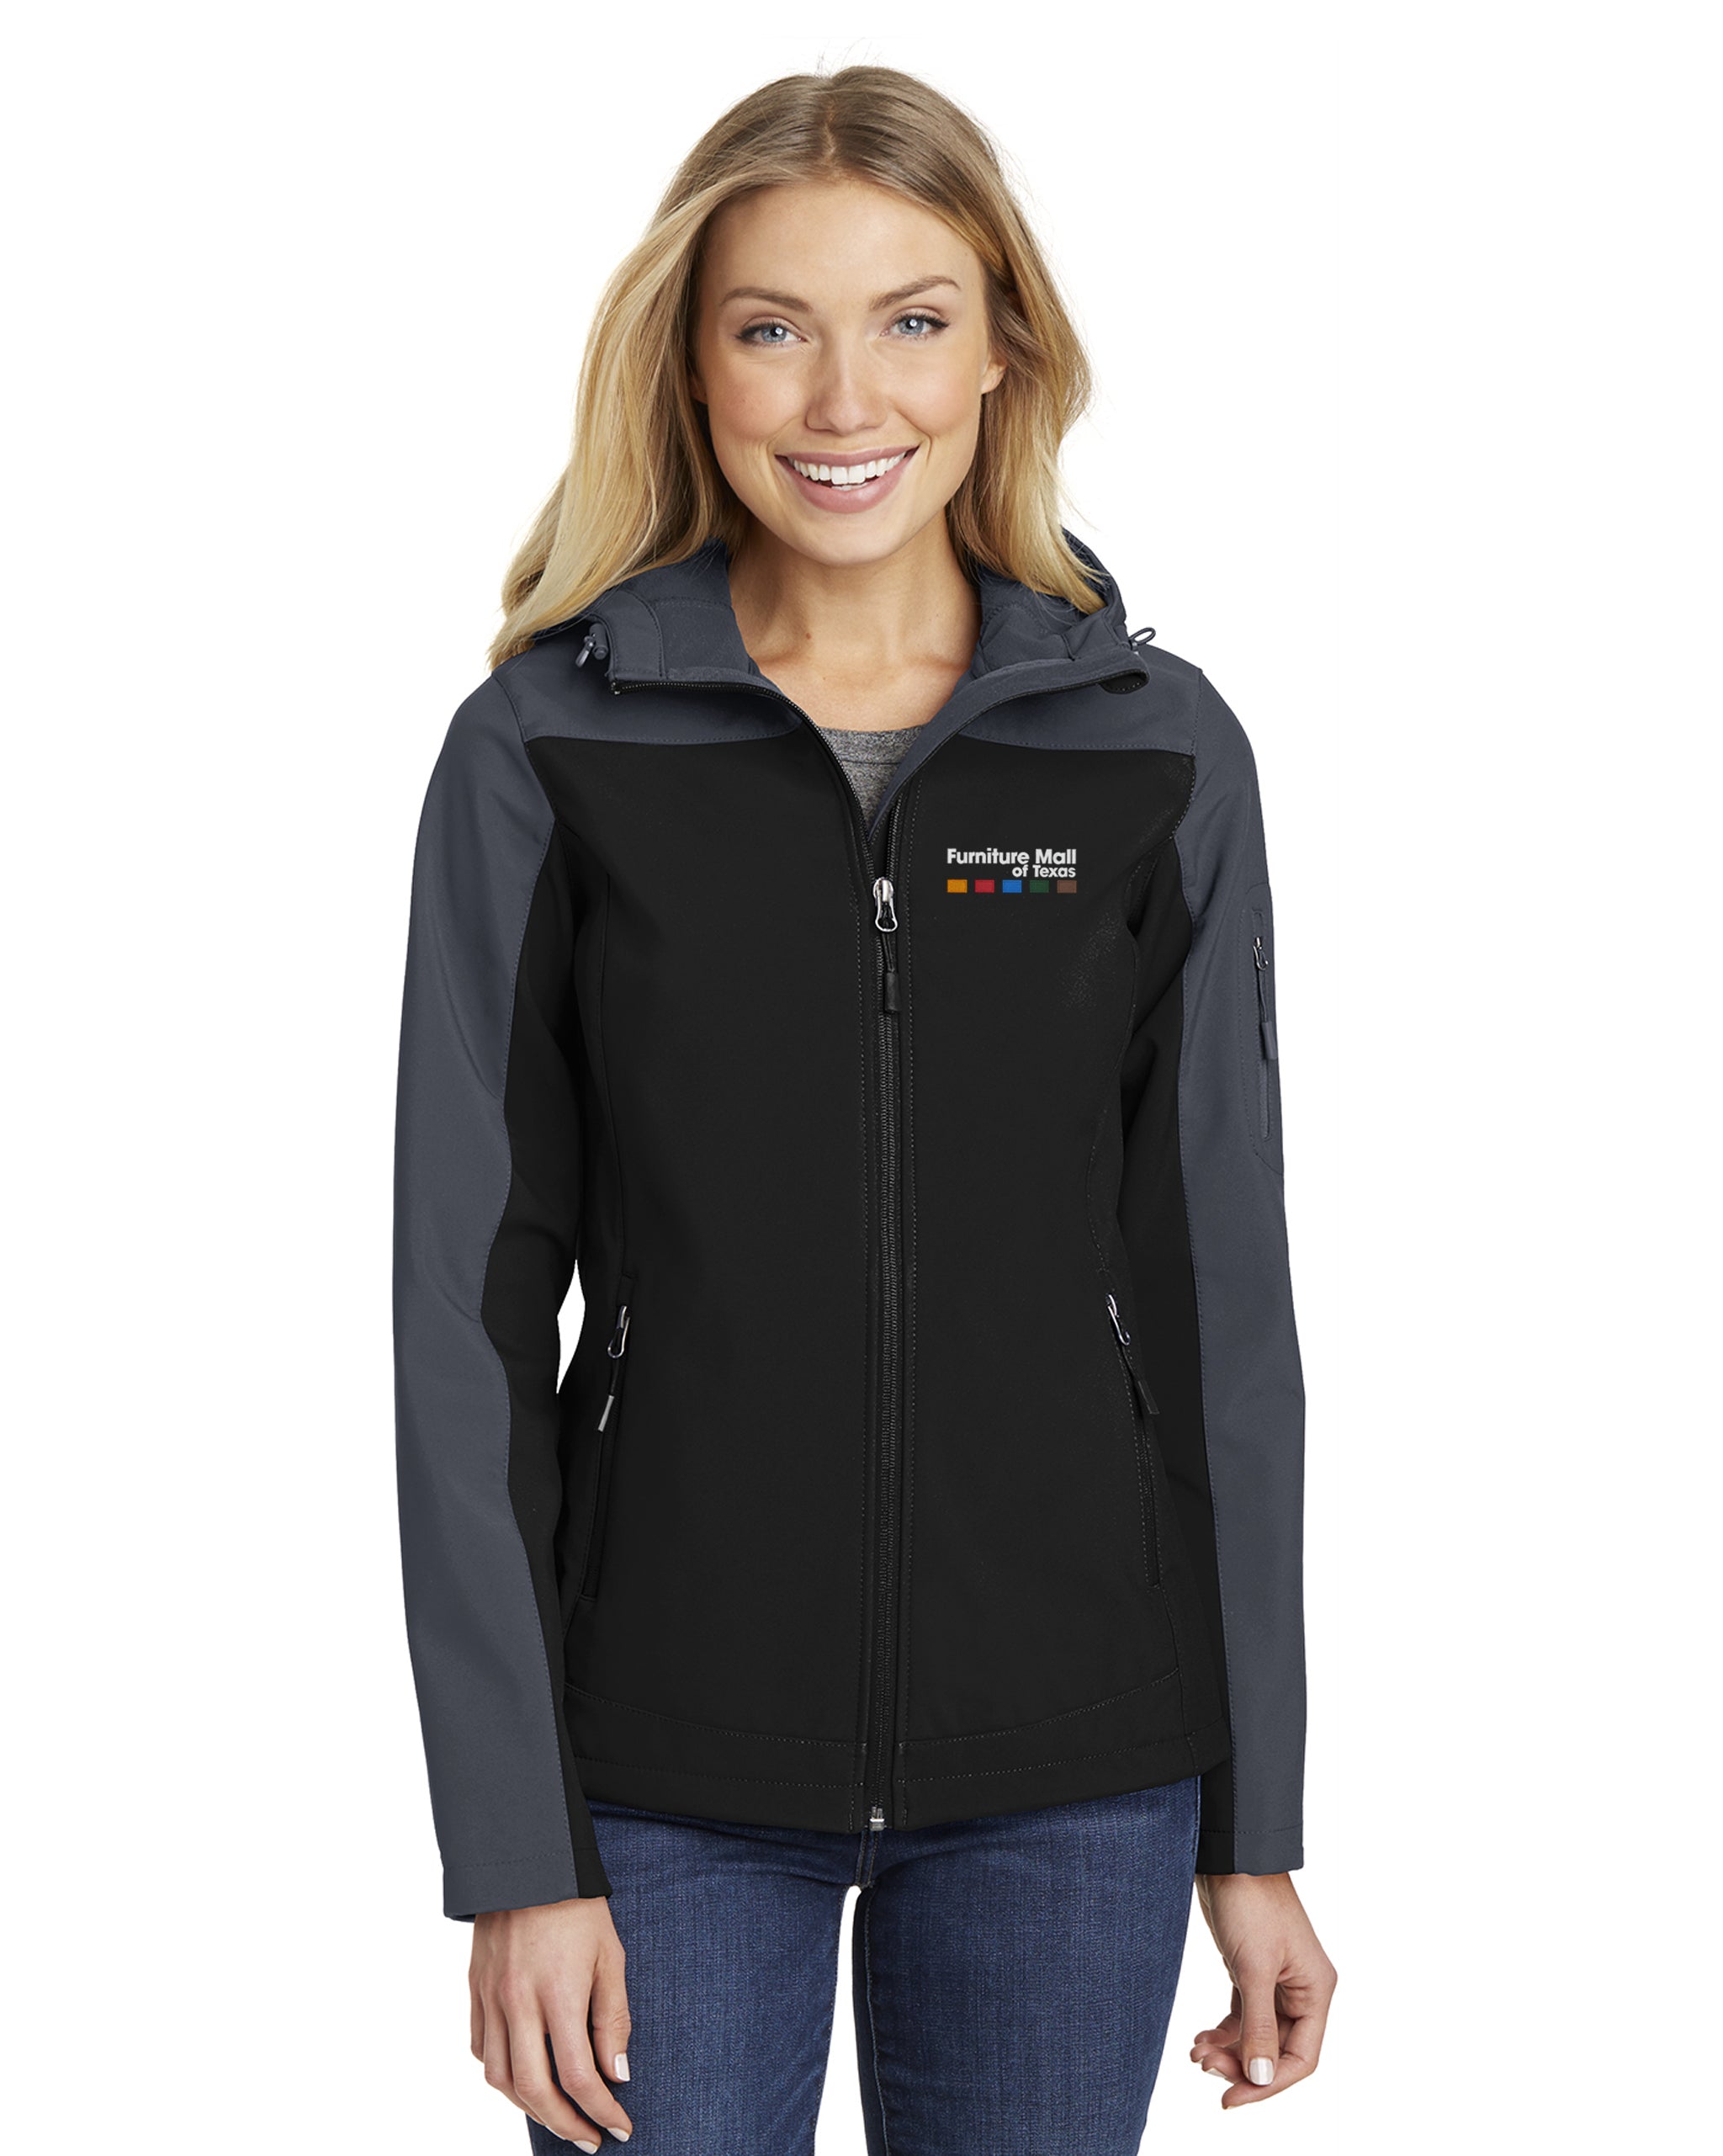 Furniture Mall of Texas - Port Authority Ladies Hooded Core Soft Shell Jacket - L335